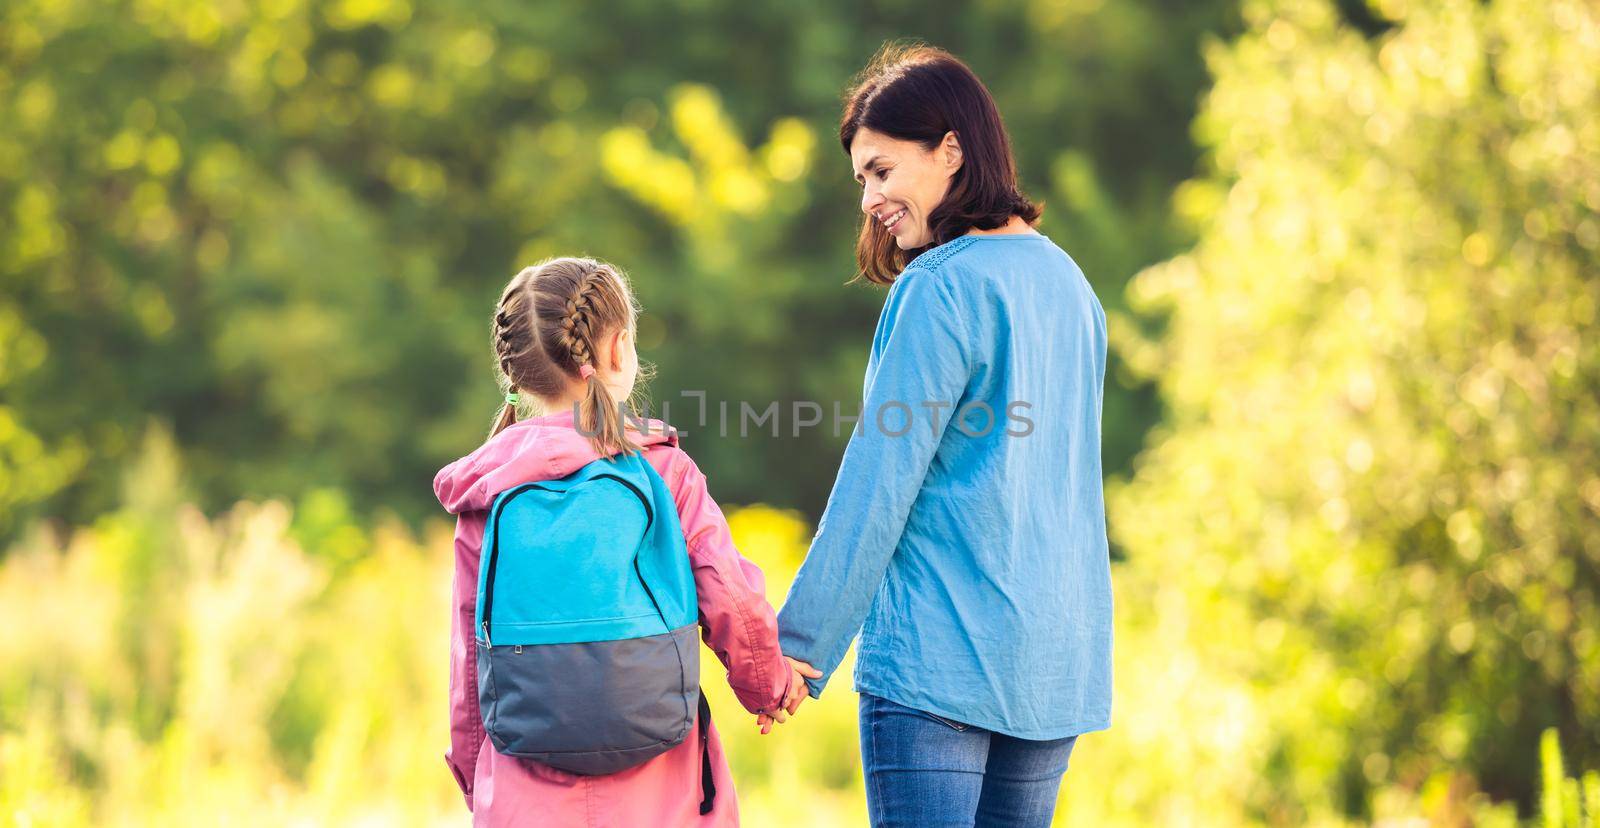 Mother meeting primary schoolgirl after classes on car parking outdoors during virus epidemic